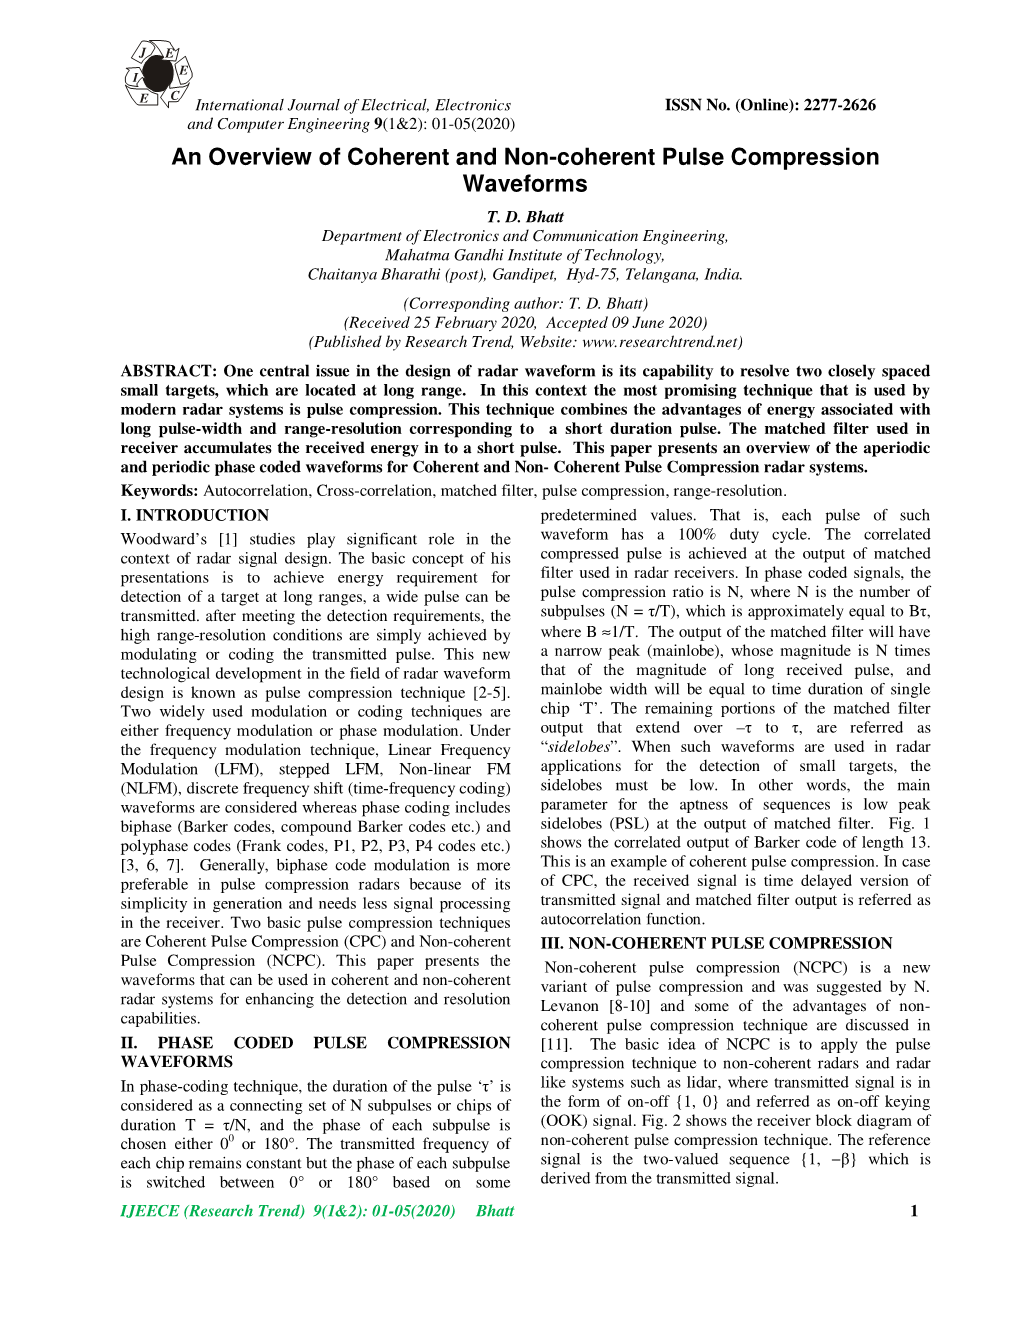 An Overview of Coherent and Non-Coherent Pulse Compression Waveforms T